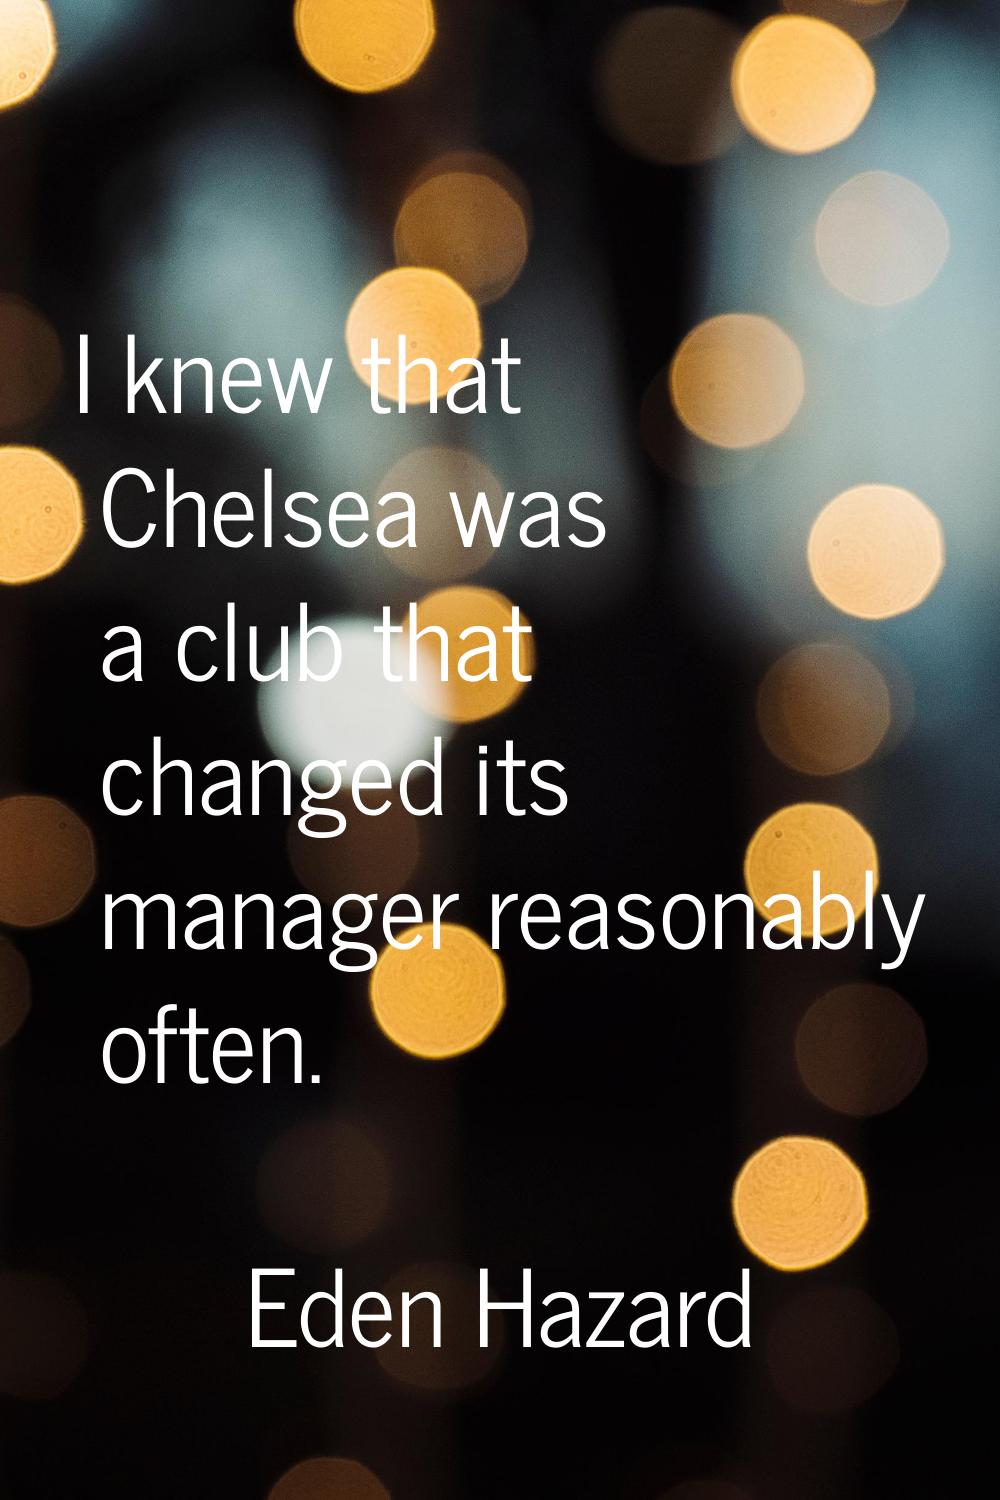 I knew that Chelsea was a club that changed its manager reasonably often.